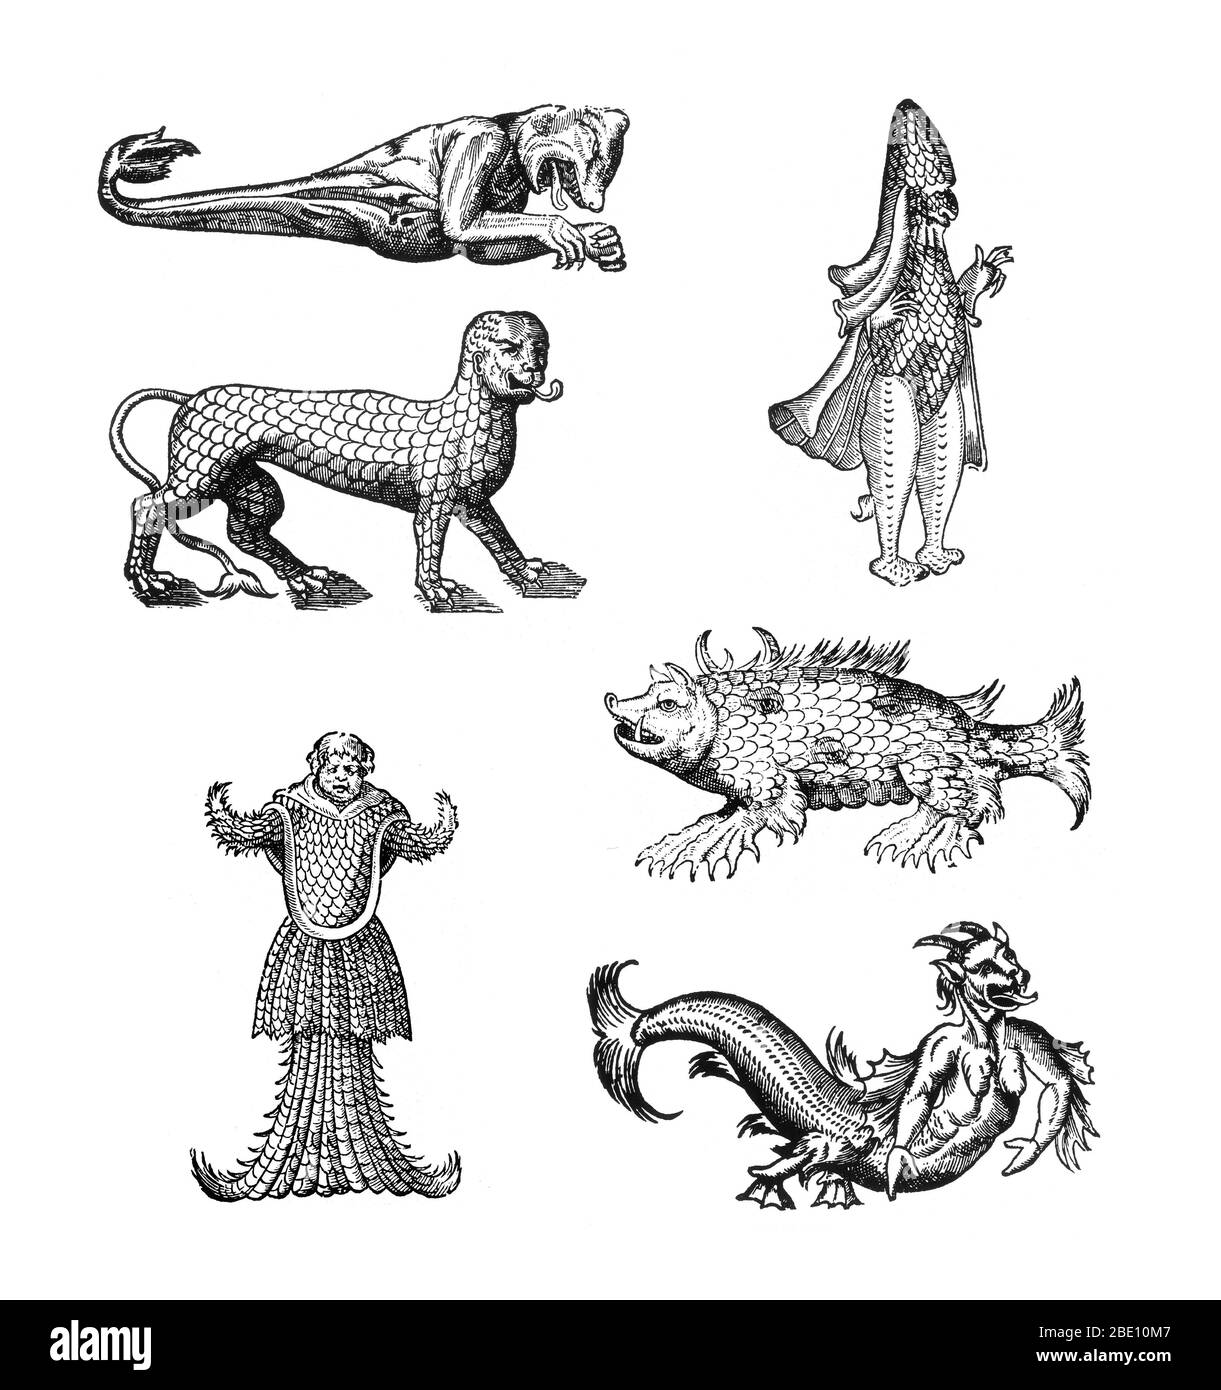 Woodcuts of sea monsters from Des Monstres et prodiges by Ambroise Paré, 1573, clockwise from top left: 'marine monster having the head of a bear and the arms of a monkey', 'marine monster resembling a Bishop dressed in his pontifical garments', 'marine sow', 'hideous figure of a Sea Devil', 'marine monster having the head of a Monk, armed and covered with fish scales', 'marine lion covered in scales'. Des Monstres is filled with unsubstantiated accounts of sea devils, marine sows, and monstrous animals with human faces. With its extensive discussion of reproduction and illustrations of birth Stock Photo